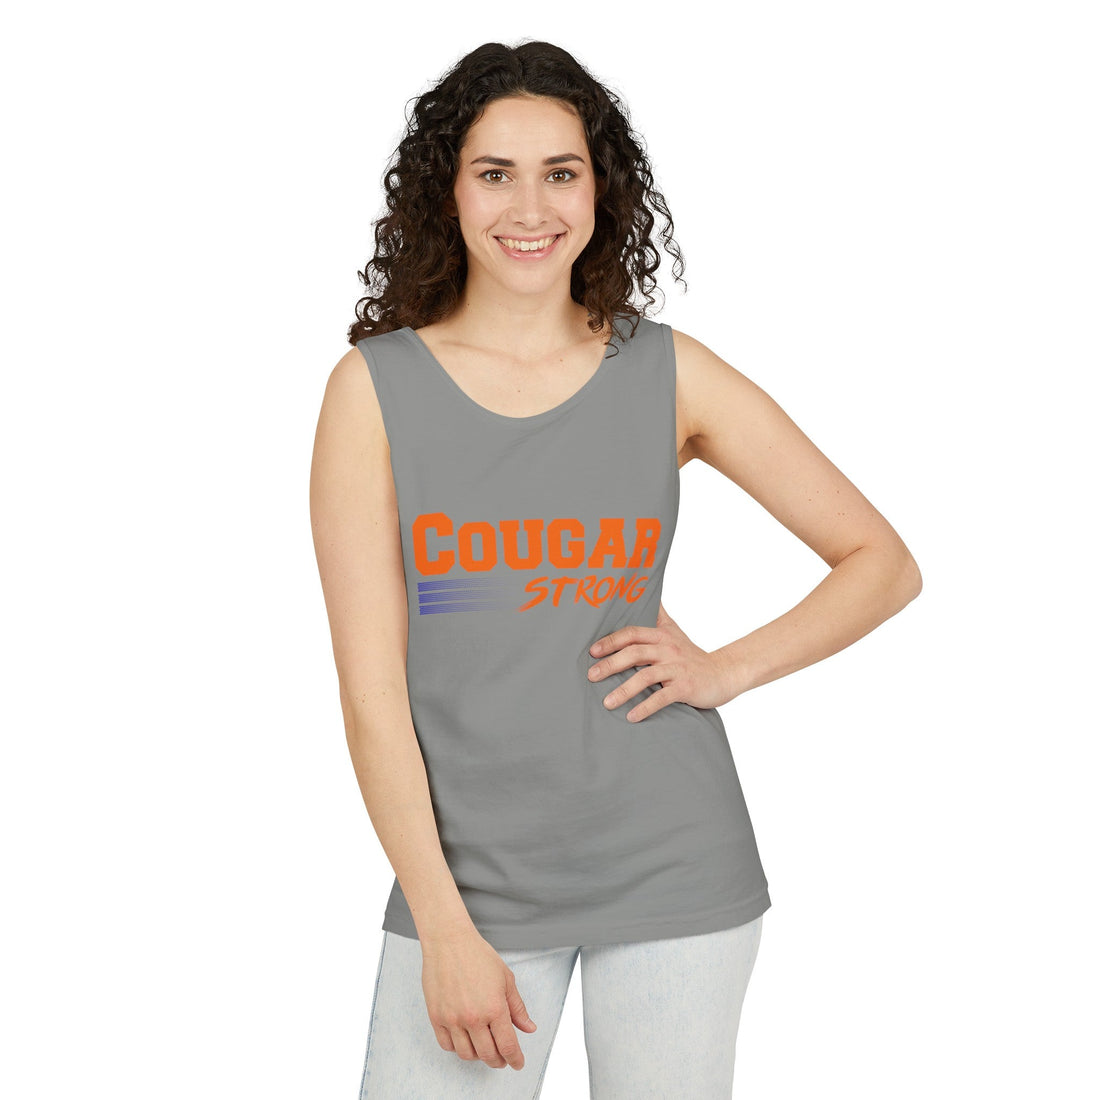 Cougar Strong Unisex Garment - Dyed Tank Top - Tank Top - Positively Sassy - Cougar Strong Unisex Garment - Dyed Tank Top